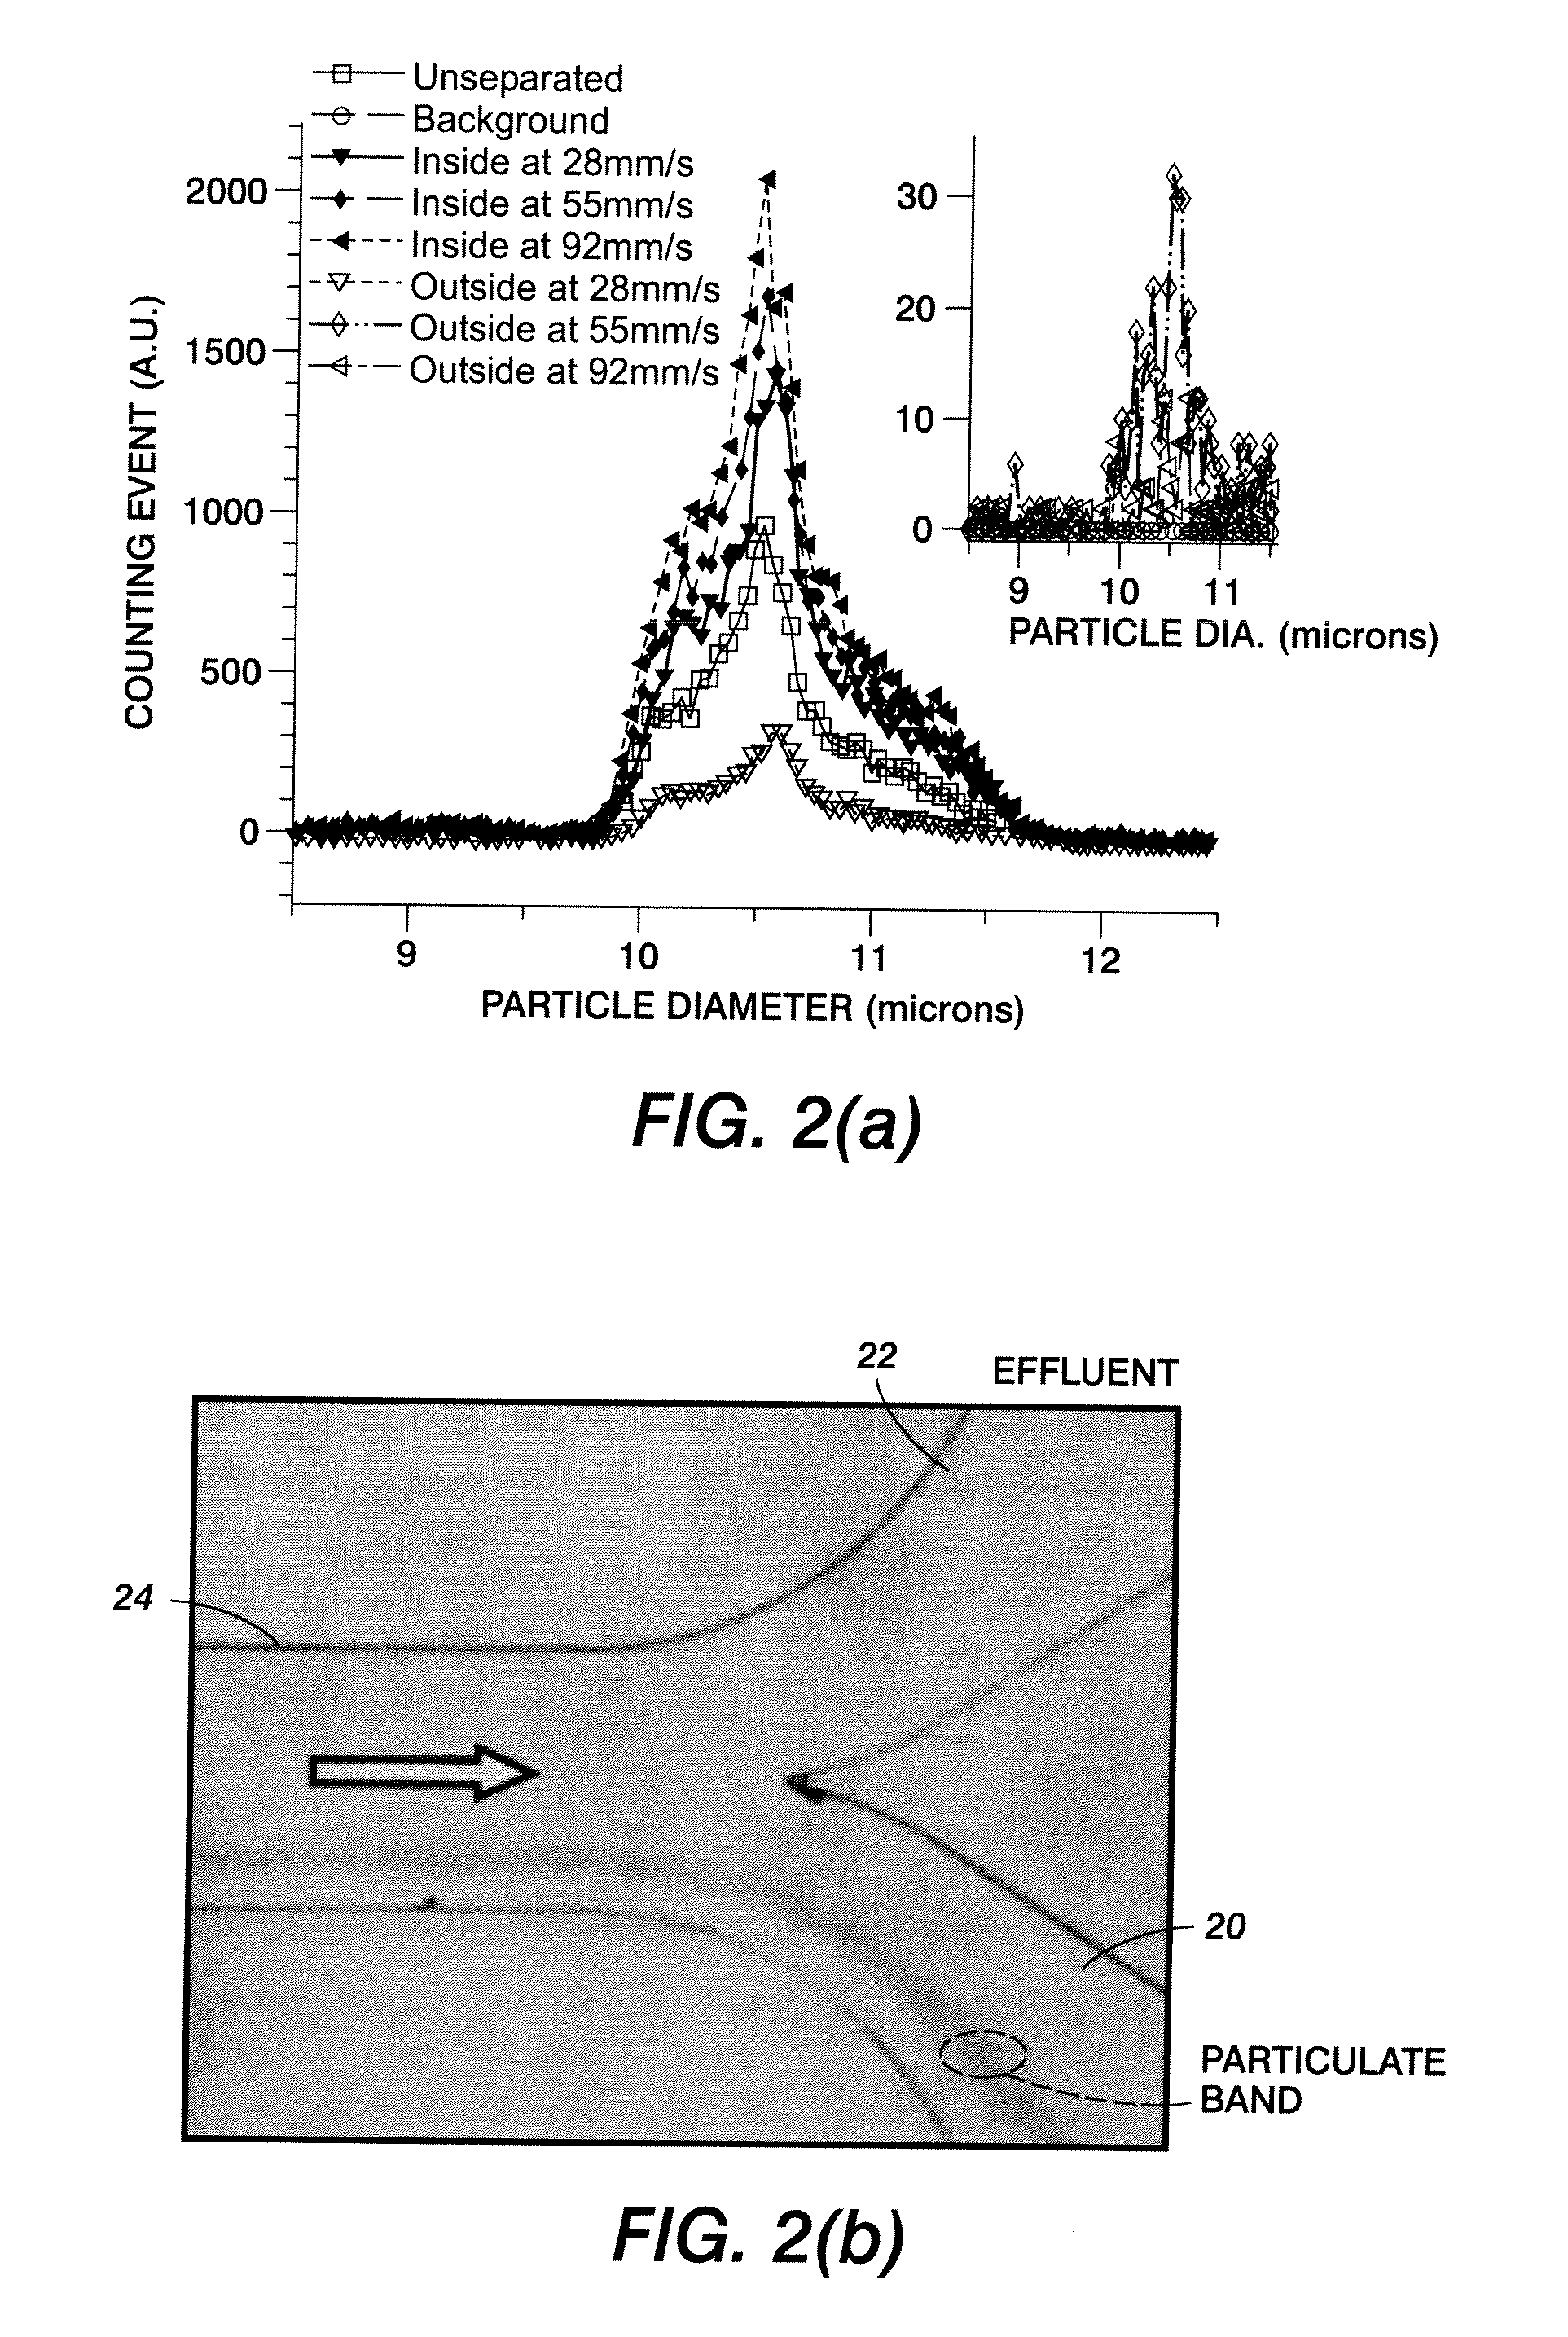 Fluidic Device and Method for Separation of Neutrally Buoyant Particles